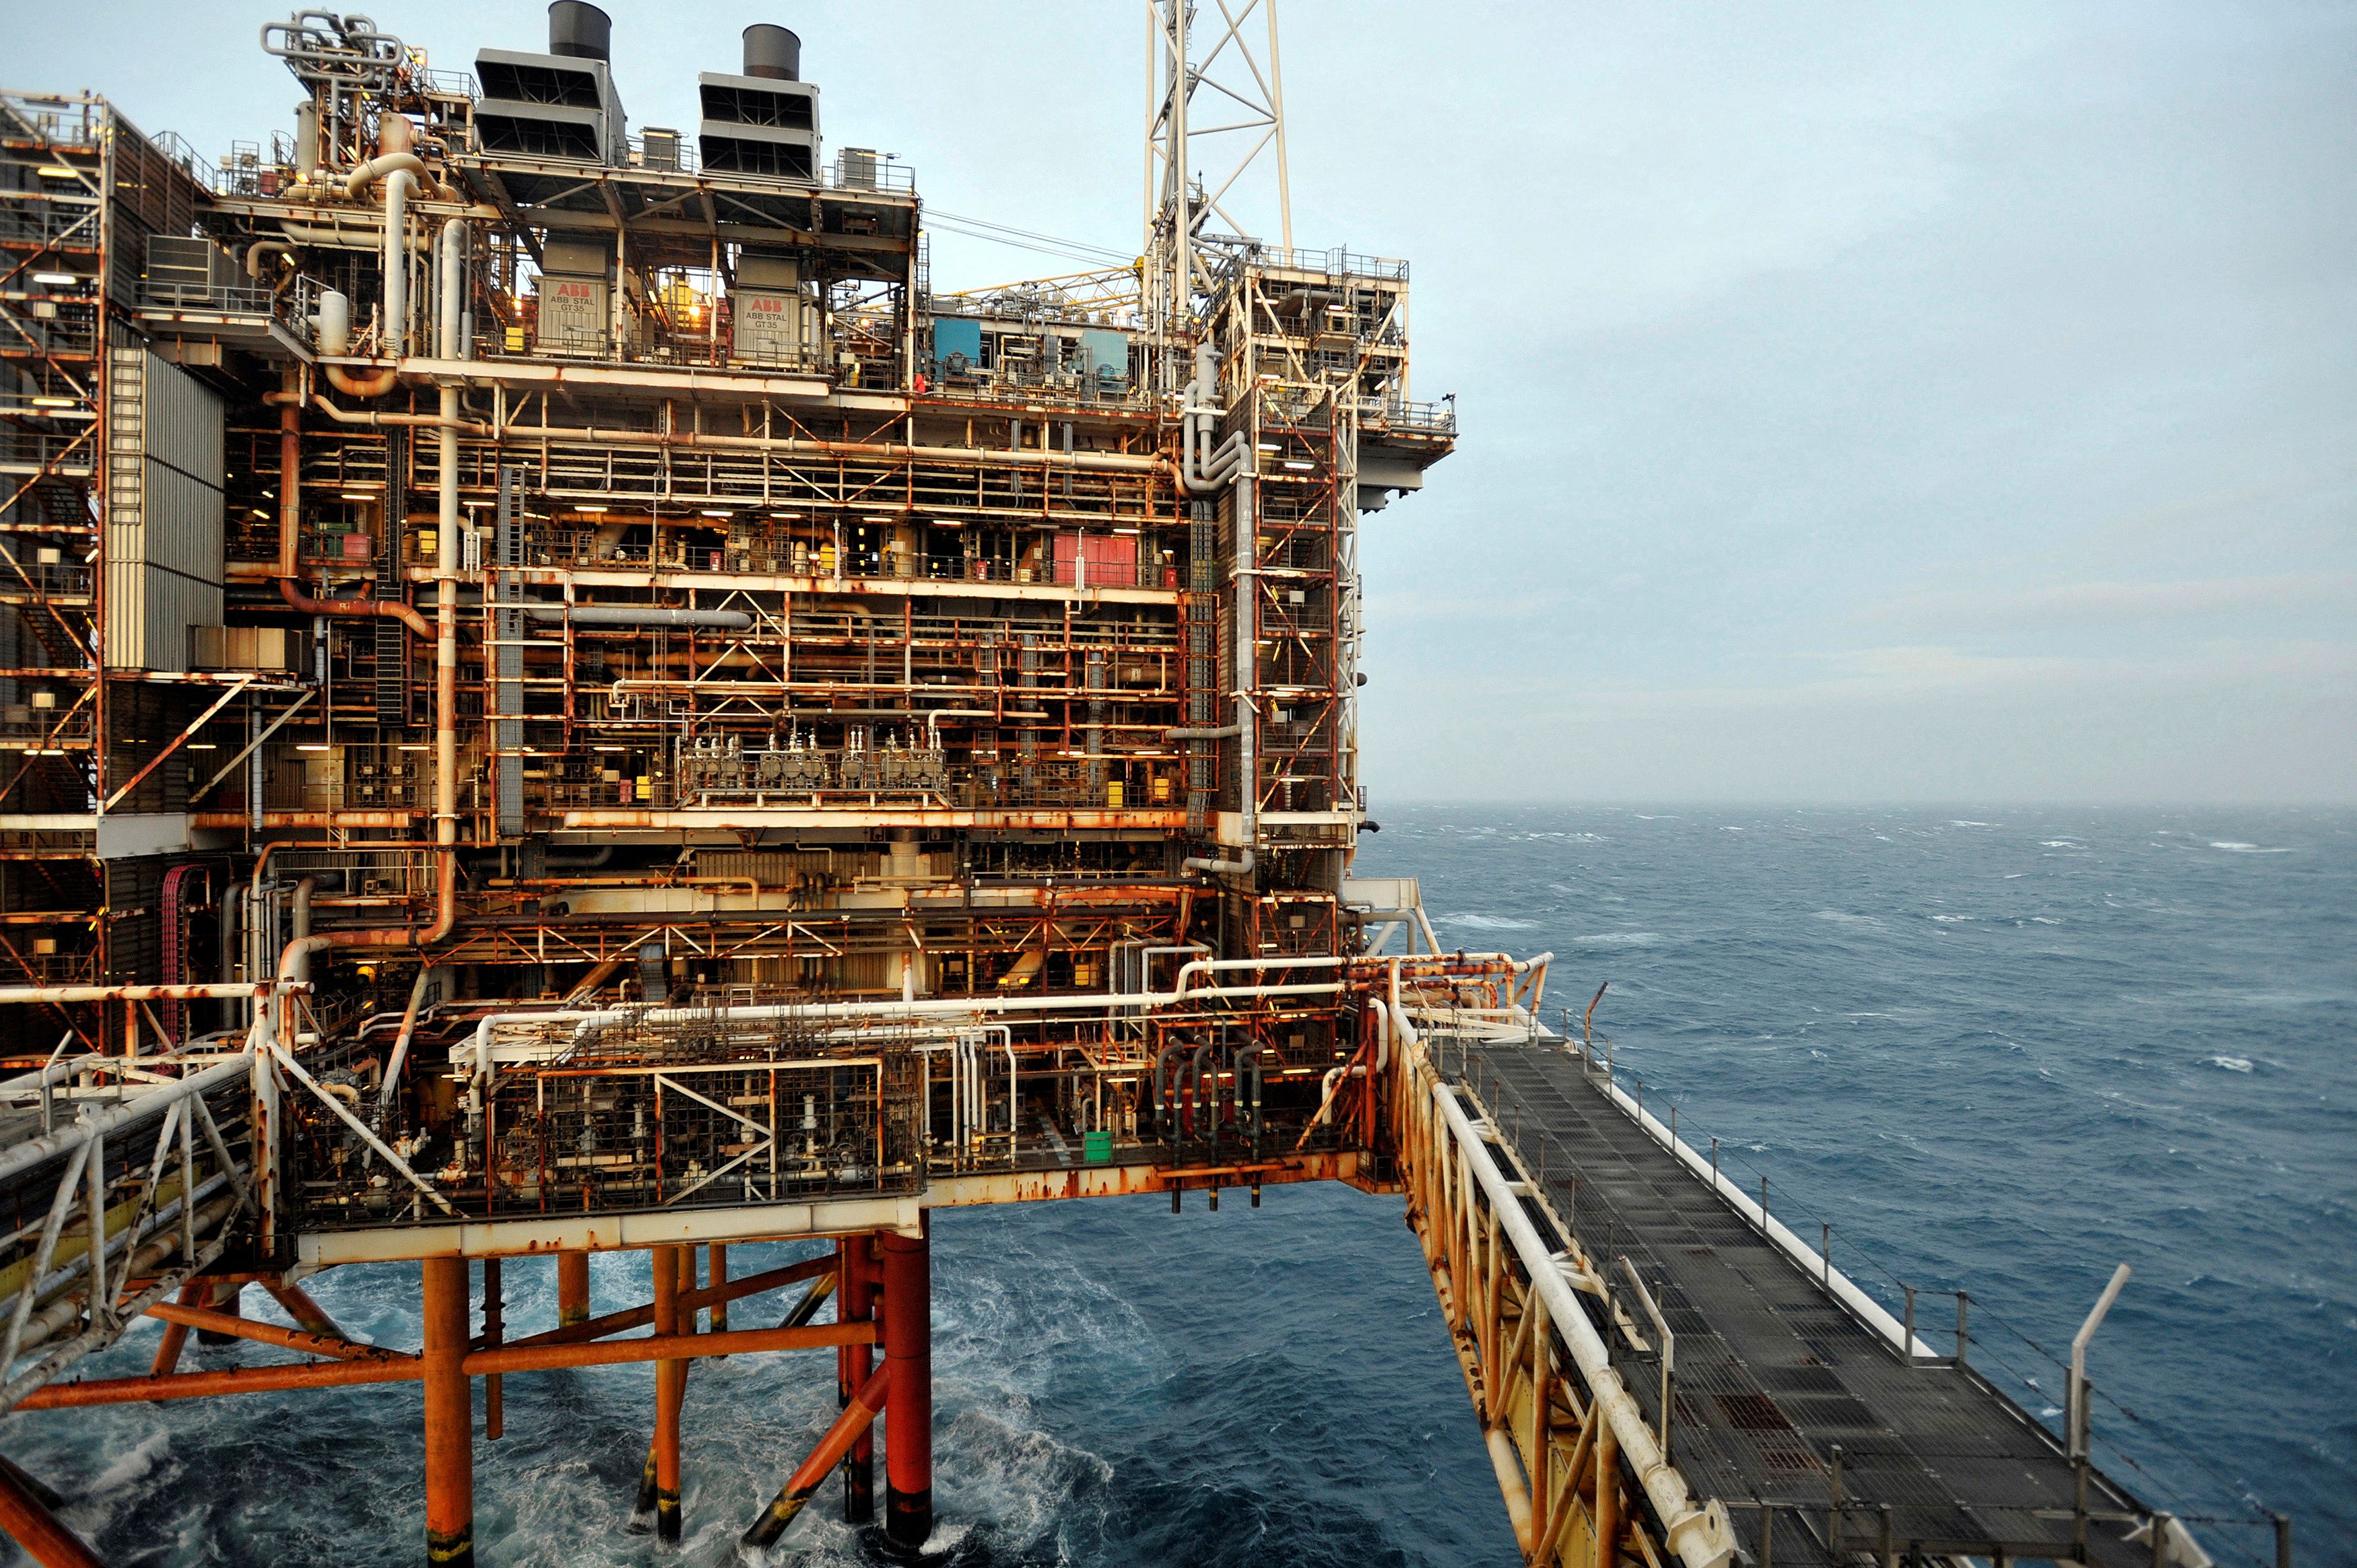 A section of the BP Eastern Trough Area Project oil platform is seen in the North Sea, around 100 miles east of Aberdeen